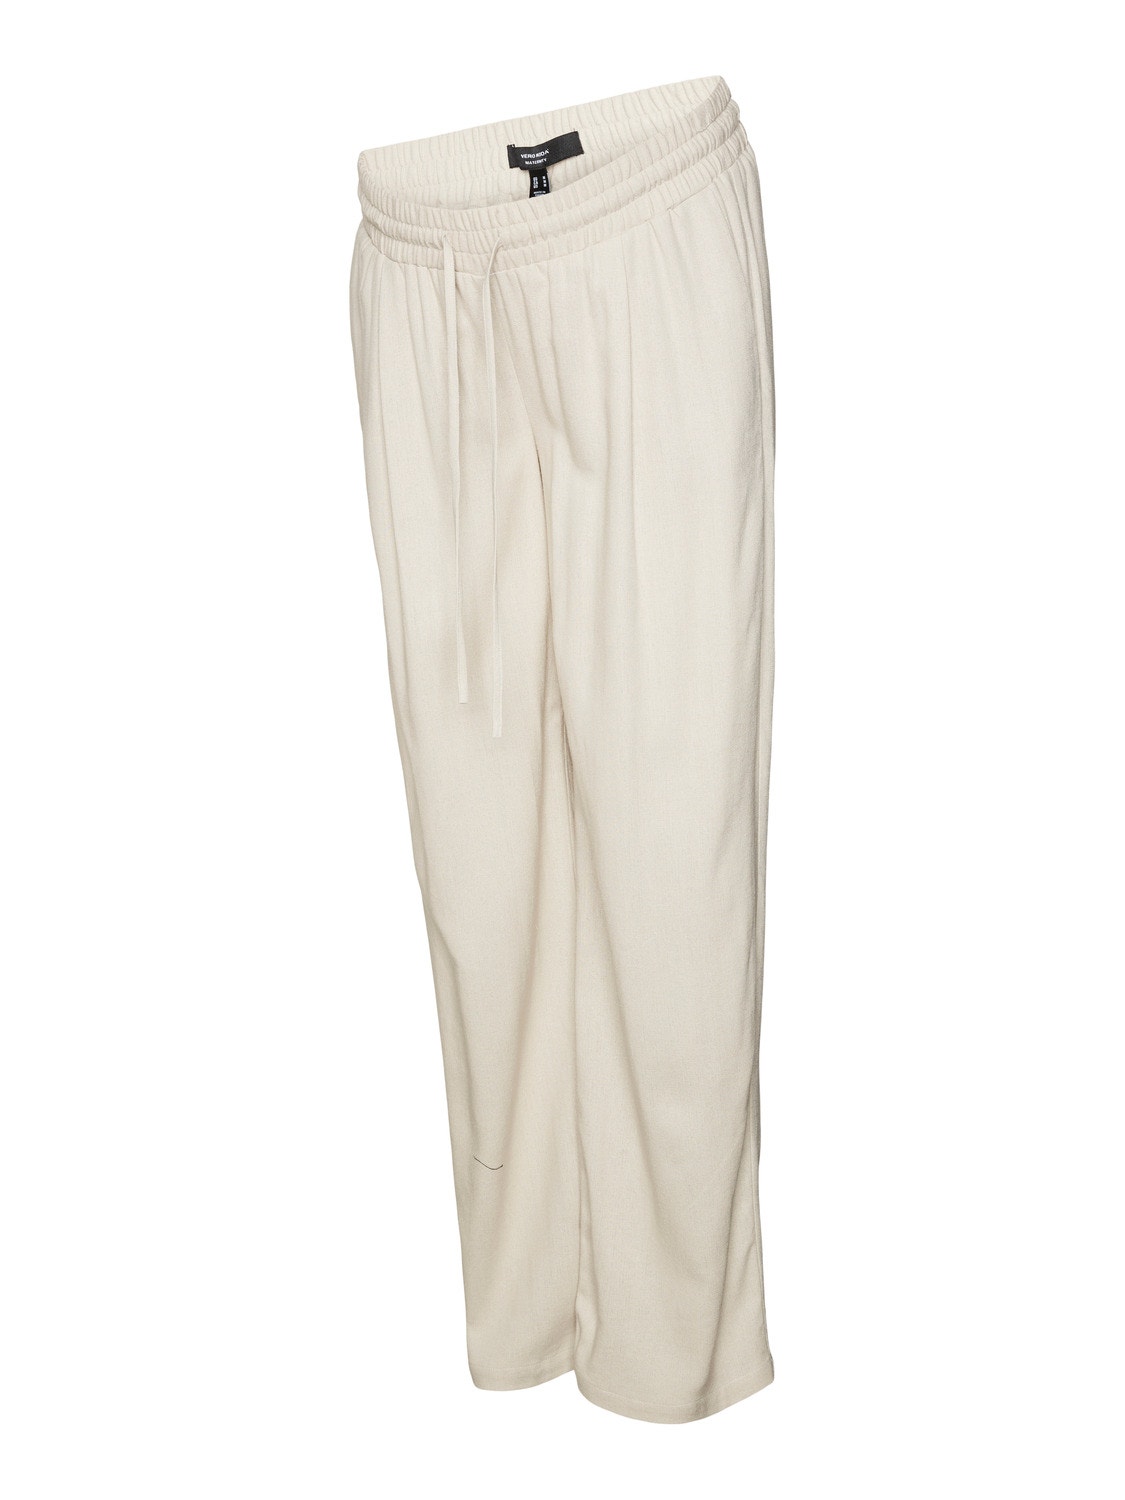 MAMA.LICIOUS Maternity-trousers -Silver Lining - 20020488